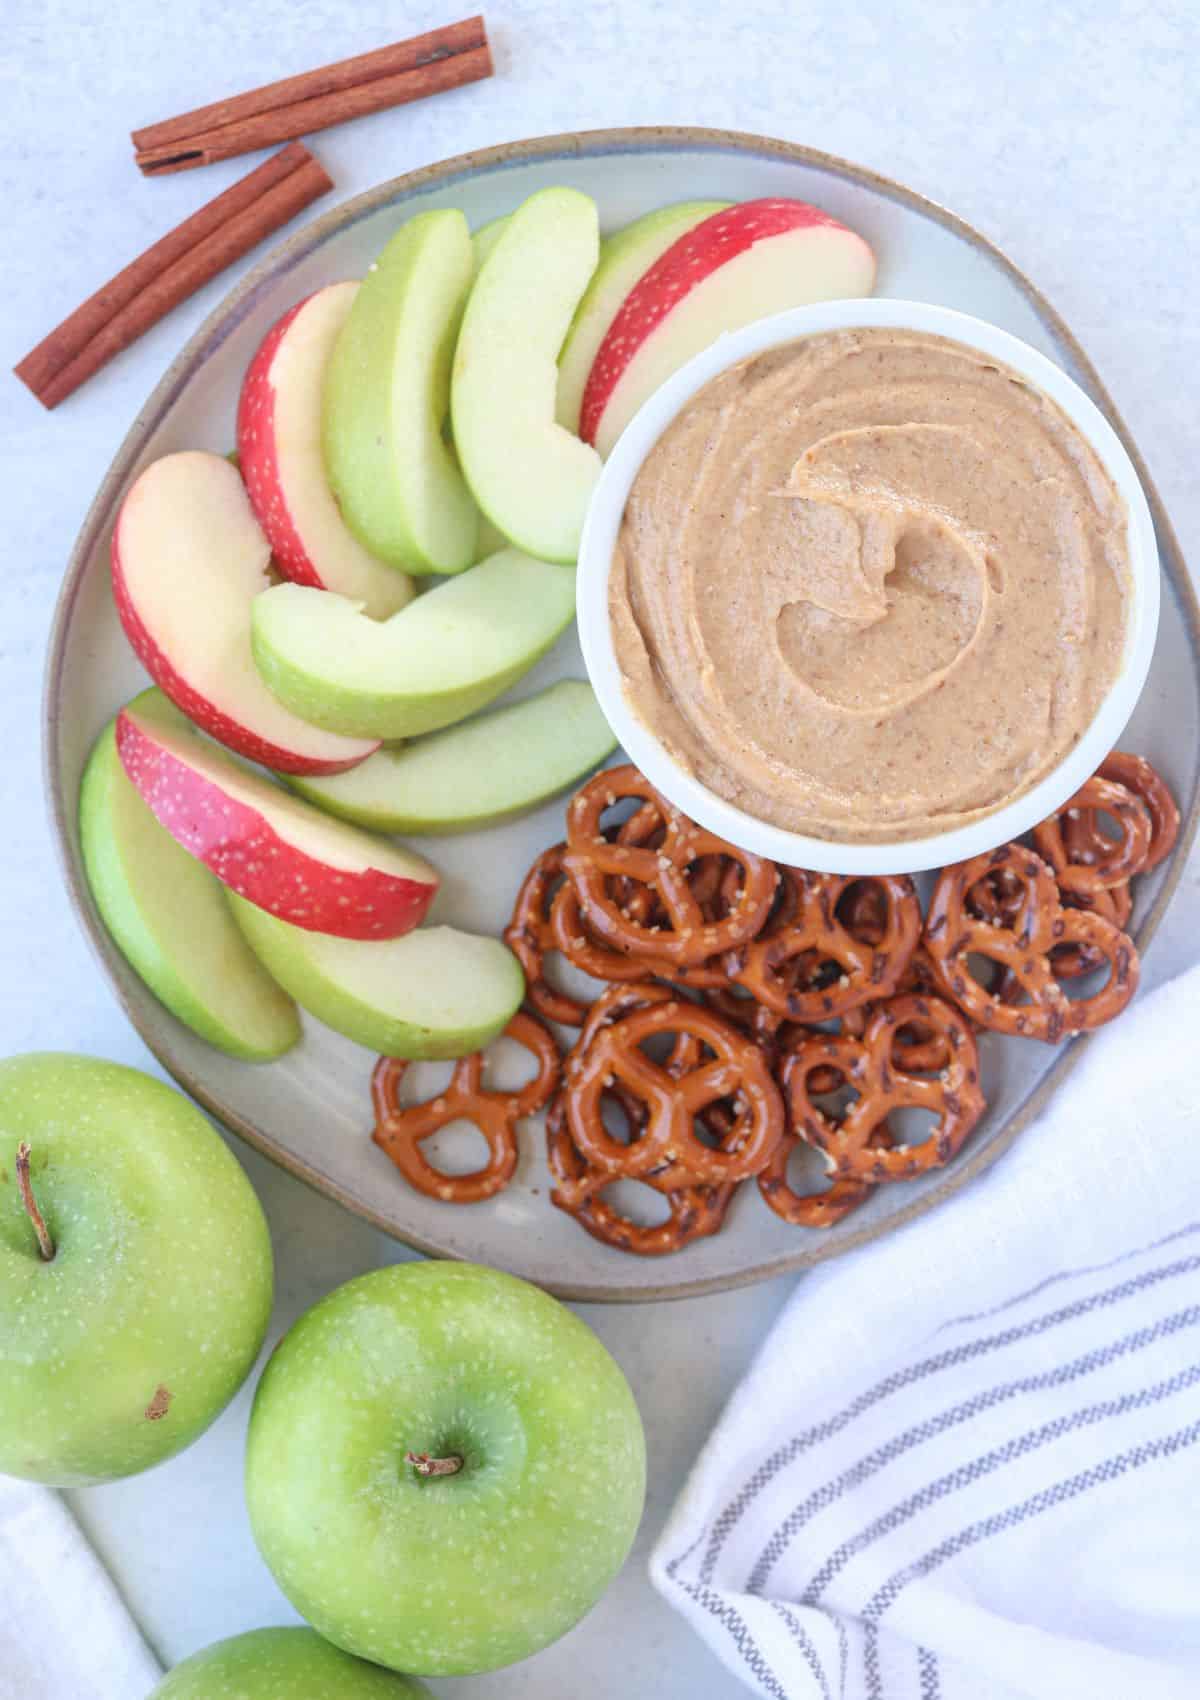 healthy yogurt caramel dip in a white ramekin on a plate surrounded by apple slices and pretzels.